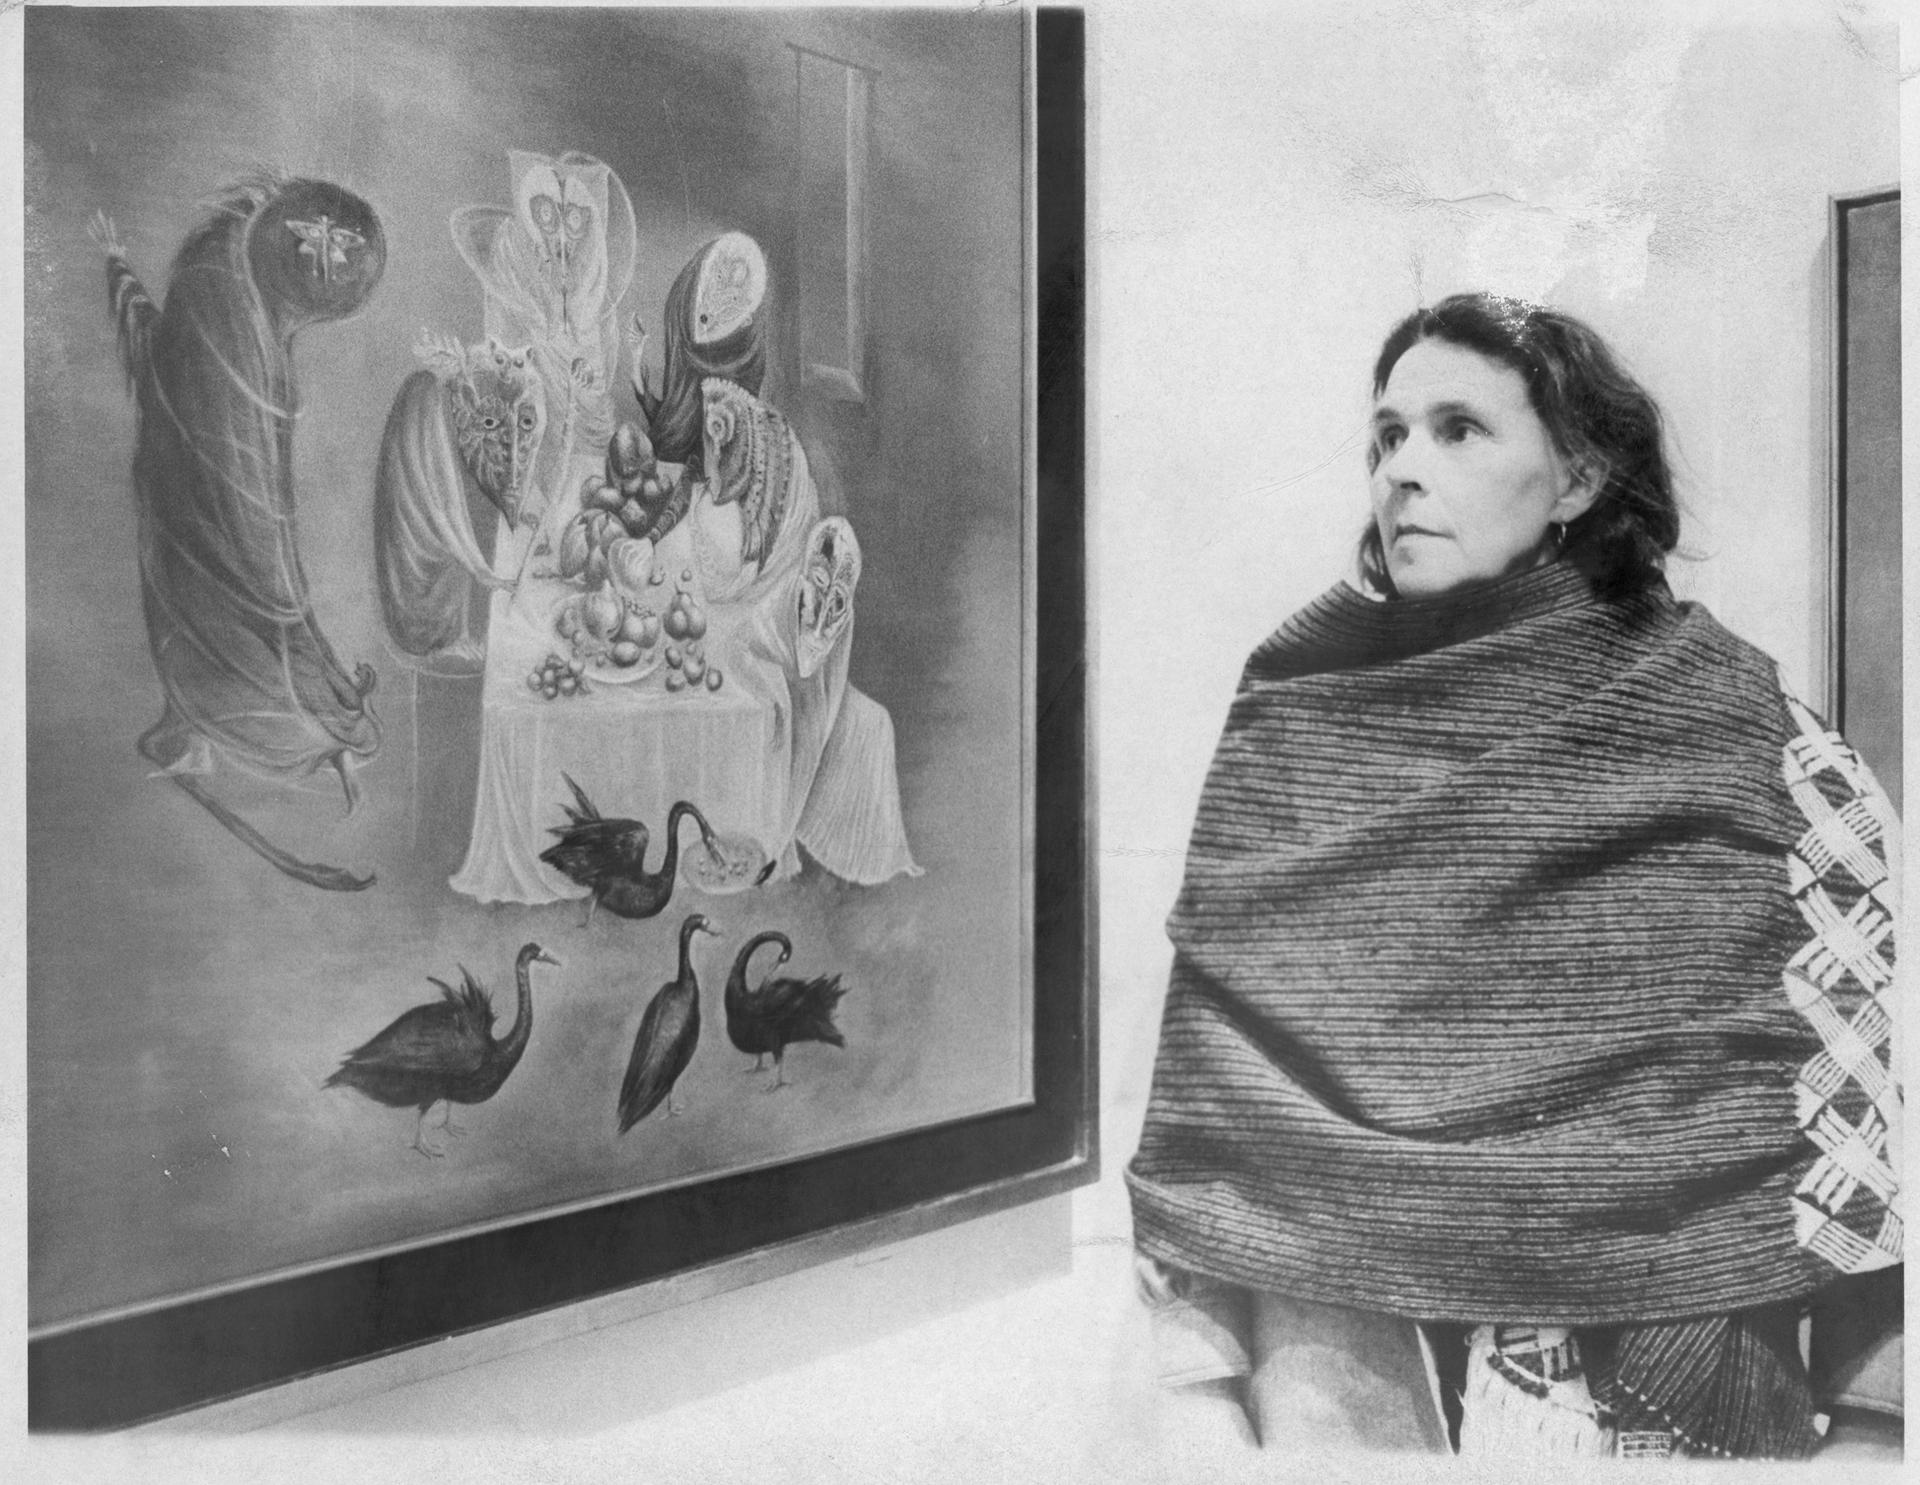 Leonora Carrington in 1975 with her work Lepidoptera (1969) Photo: Jerry Engel/New York Post Archives /© NYP Holdings, Inc. via Getty Images